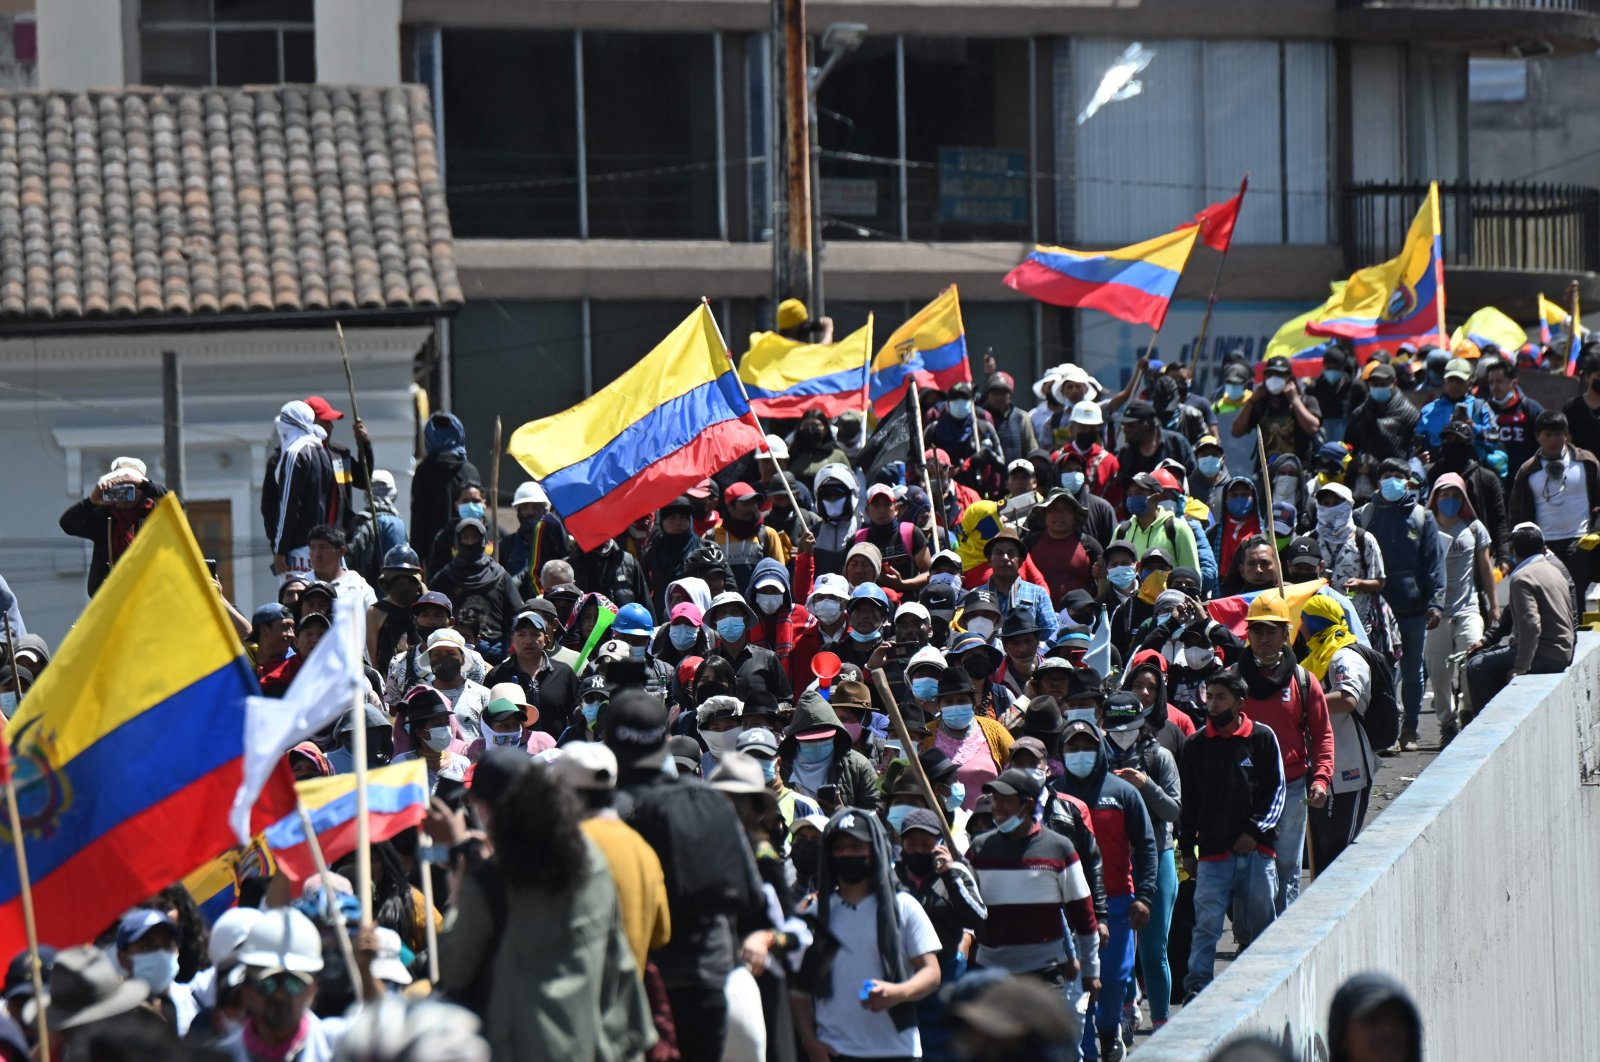 Indigenous people march amid protests against the government, in Quito, Ecuador, June 23, 2022. (AFP Photo)